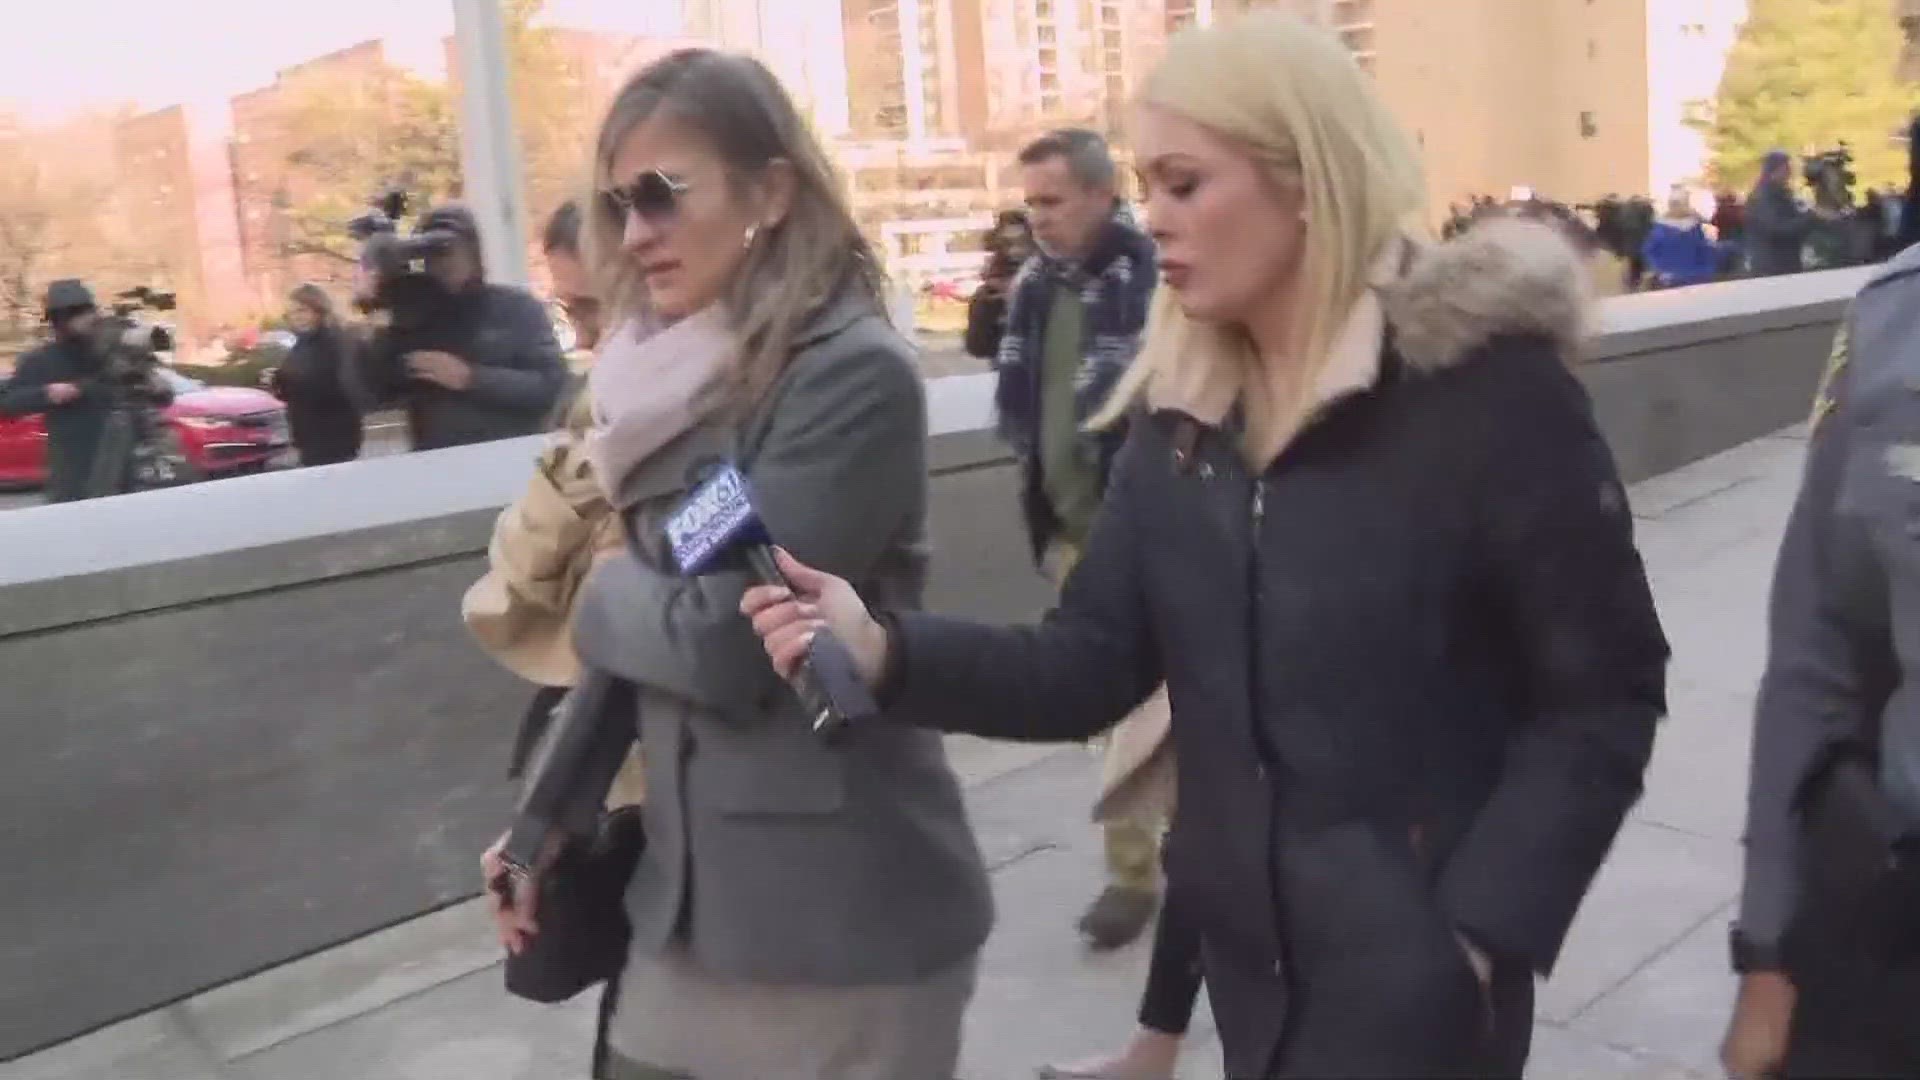 Troconis' family is 'devastated' by the verdict, while the loved ones of Jennifer Farber Dulos said today was a day of "accountability, not a victory."